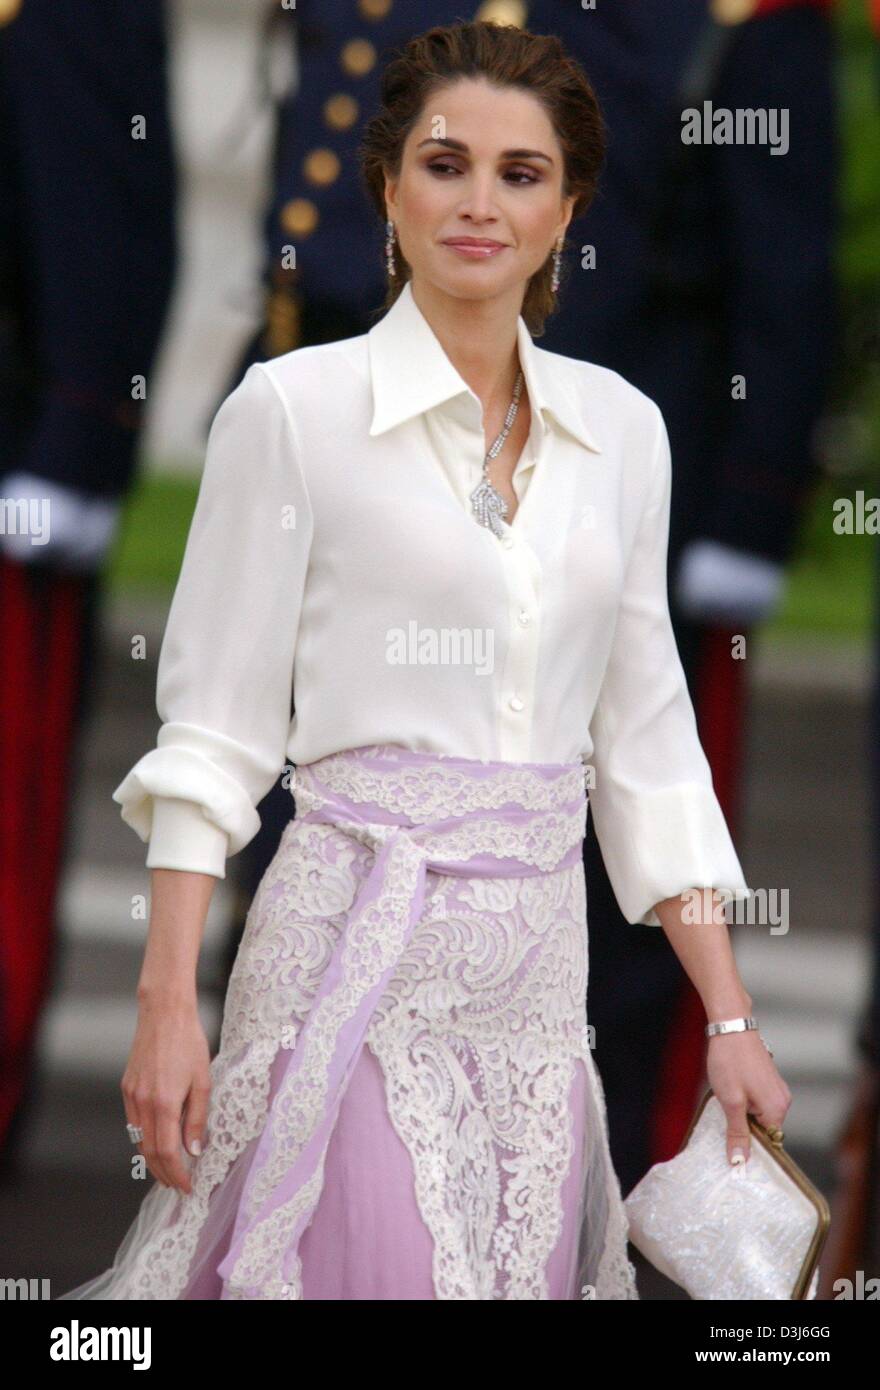 (dpa) - Queen Rania of Jordan smiles as she arrives at the Almudena Cathedral for the wedding of Spanish crown prince Felipe and Letizia Ortiz in Madrid, Spain, Saturday 22 May 2004. Stock Photo